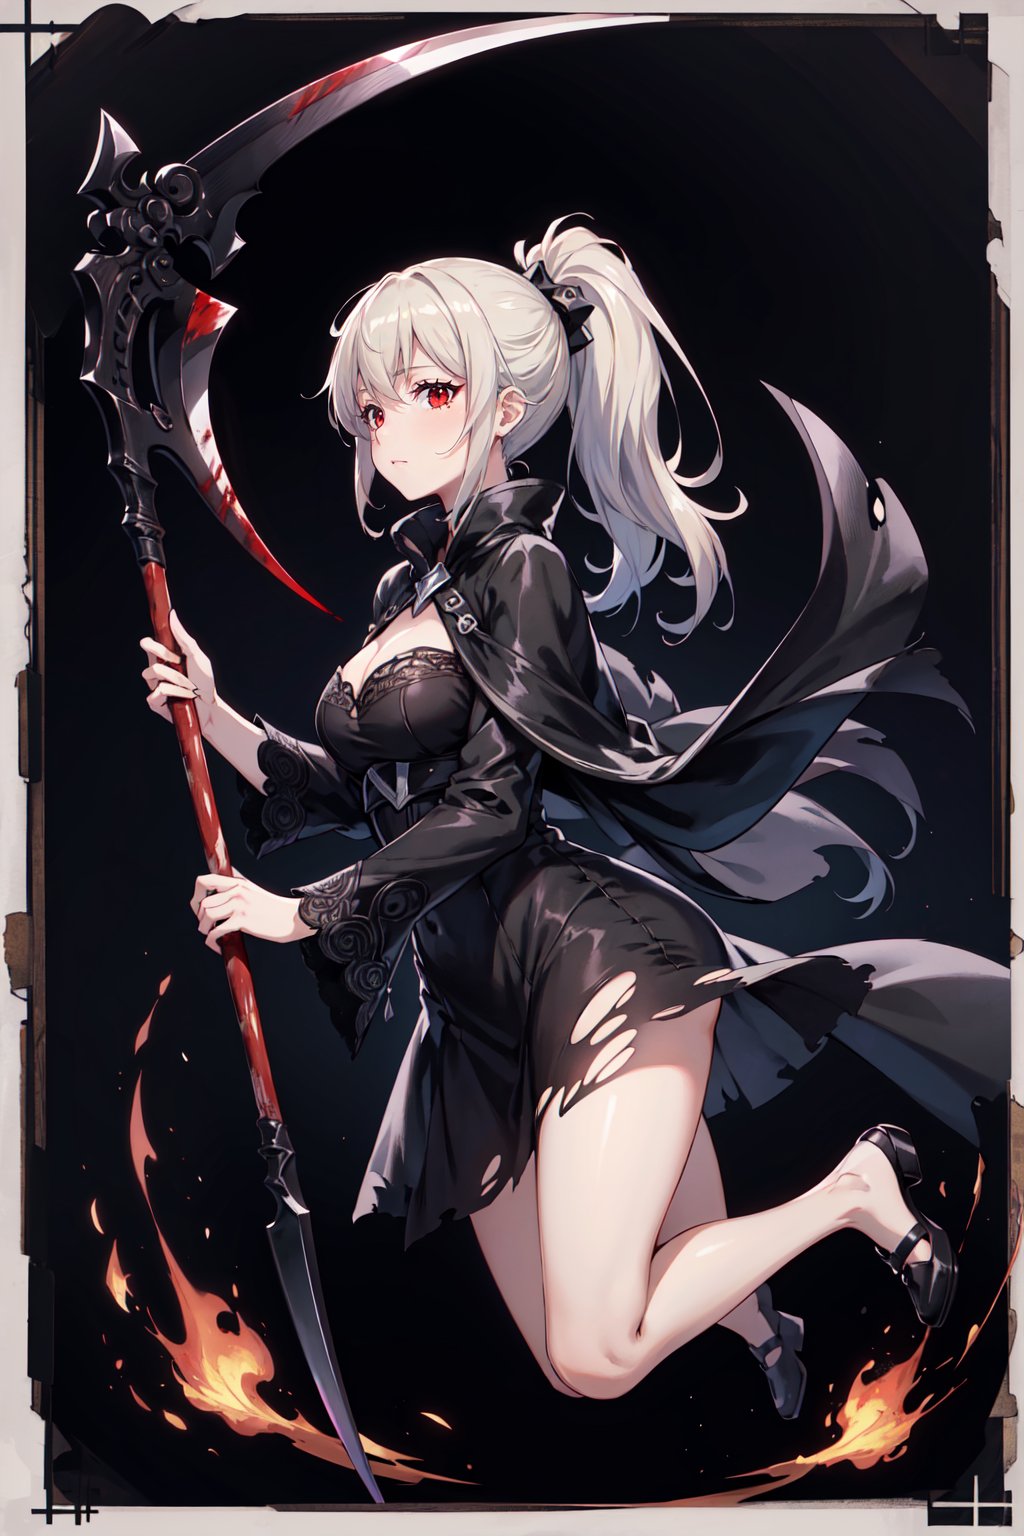 best quality, highres, absurdres, full body, (ultra-detailed:1.1025), ), little girl, patent drawings, dark theme, 1girl, silver hair, high ponytail, red eyes, reflection, night, from side, action, jumping, cold, blonde hair, bare legs, torn clothes, gradient background, ash, flying ash, dust, stationery, (, solo, ), cohesive background, (, character sheet, ), thin, full body, long dress, flying, scythe, big scythe, black fire, black flame, white flame, cold, ice, gothic, scythe, big scythe, monster, huge weapon, weapon, (, (best quality), ), (, (masterpiece), ), (, (ultra-detailed), ), (, illustration, ), (, detailed light, ), (, an extremely delicate and beautiful, ), (, (a beautiful girl:1.4), ), (, (cowboy shot), ), (, (standding), incredibly_absurdres, wallpaper, highres, artbook, death, ((Death Scythe)), Scythe, cloak, black background, bone, Monster, saint-like, Frightening, Perfect weapon, Death, Death, Death darksouls, blood stain, bloodborne, dark, (masterpiece), (best quality), (super delicate), (best illustration), (an extremely delicate and beautiful), (intricate detail), (depth of field), (extremely detailed), extremely detailed, 32K UHD, absurdres, super-resolution, Canon EOS MARK IV Best_QualityPos CS-RBW HenHelperPos